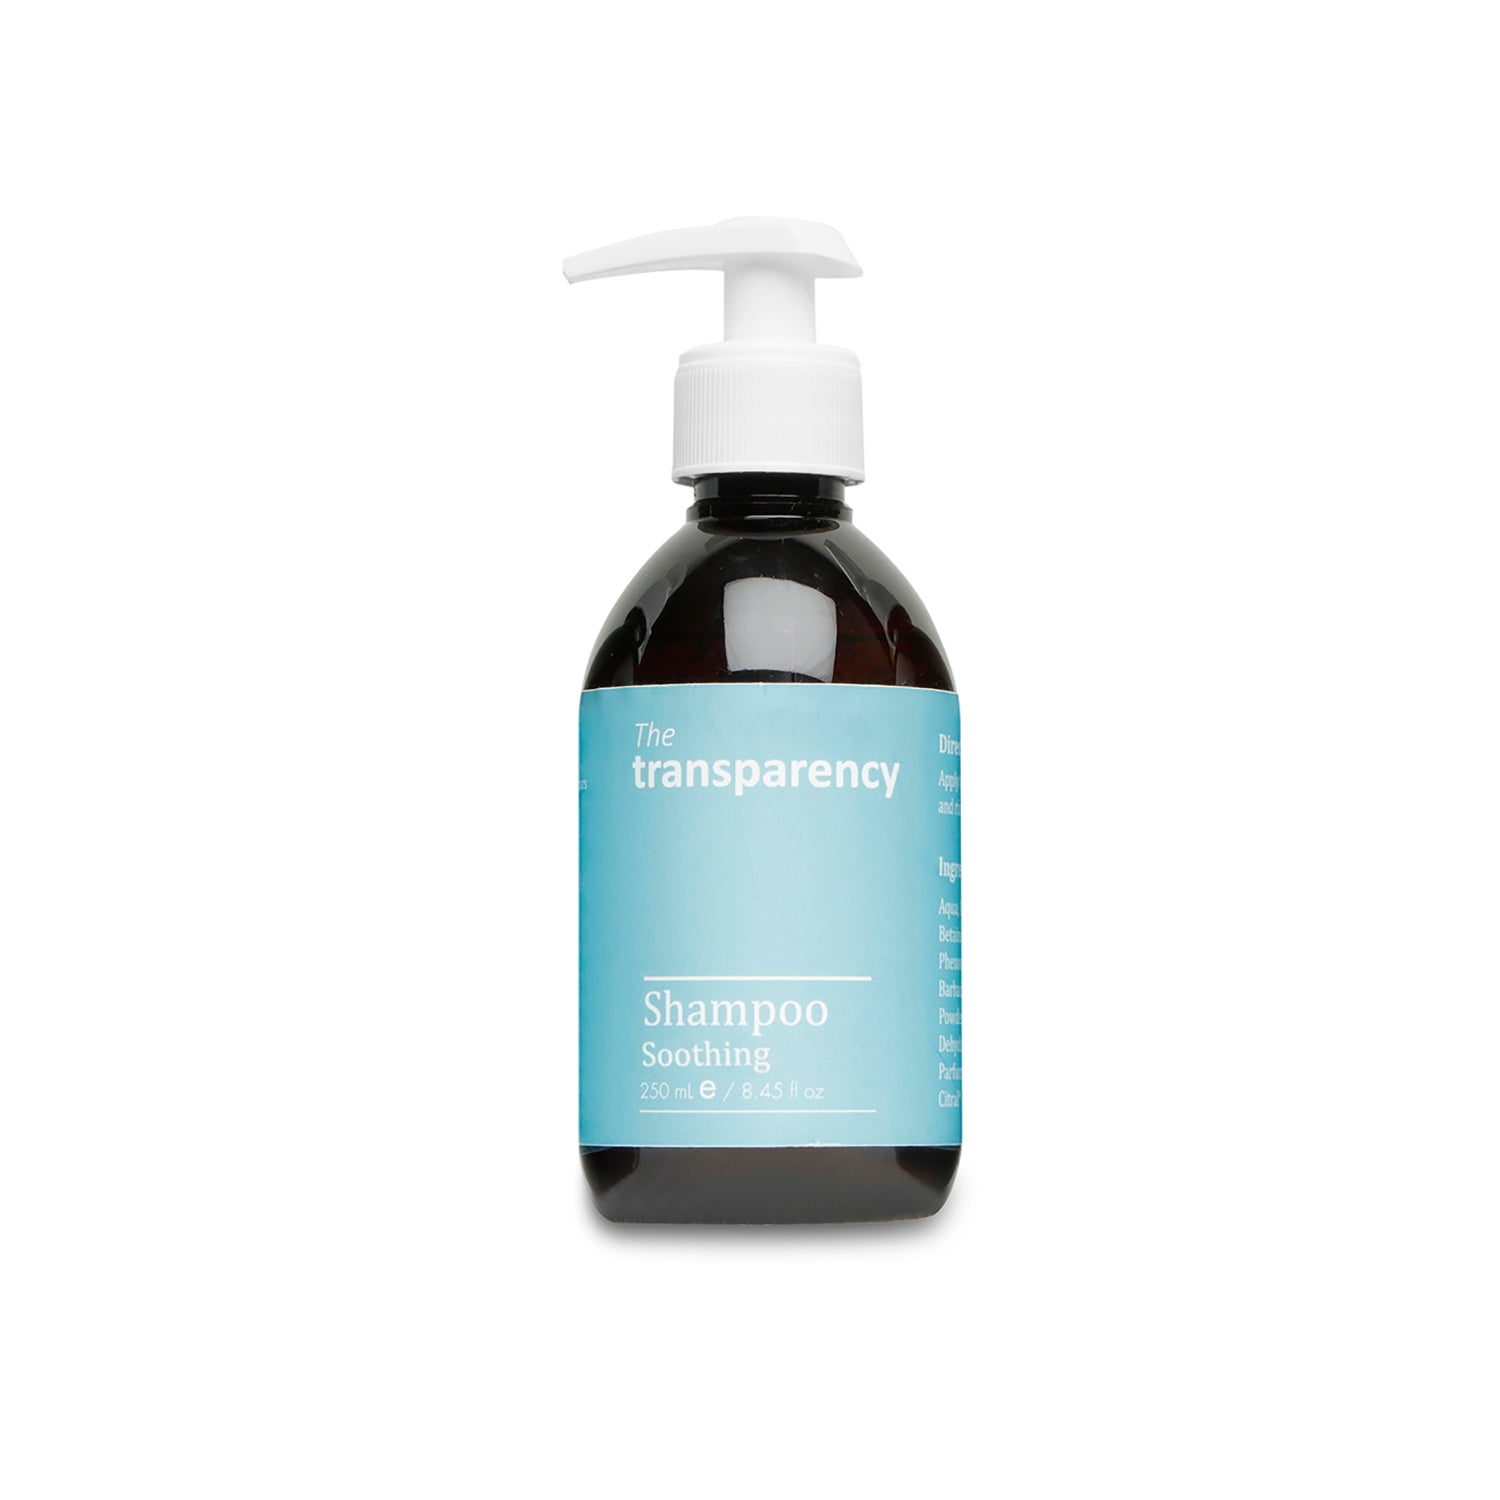 Soothing Hair Shampoo - The transparency